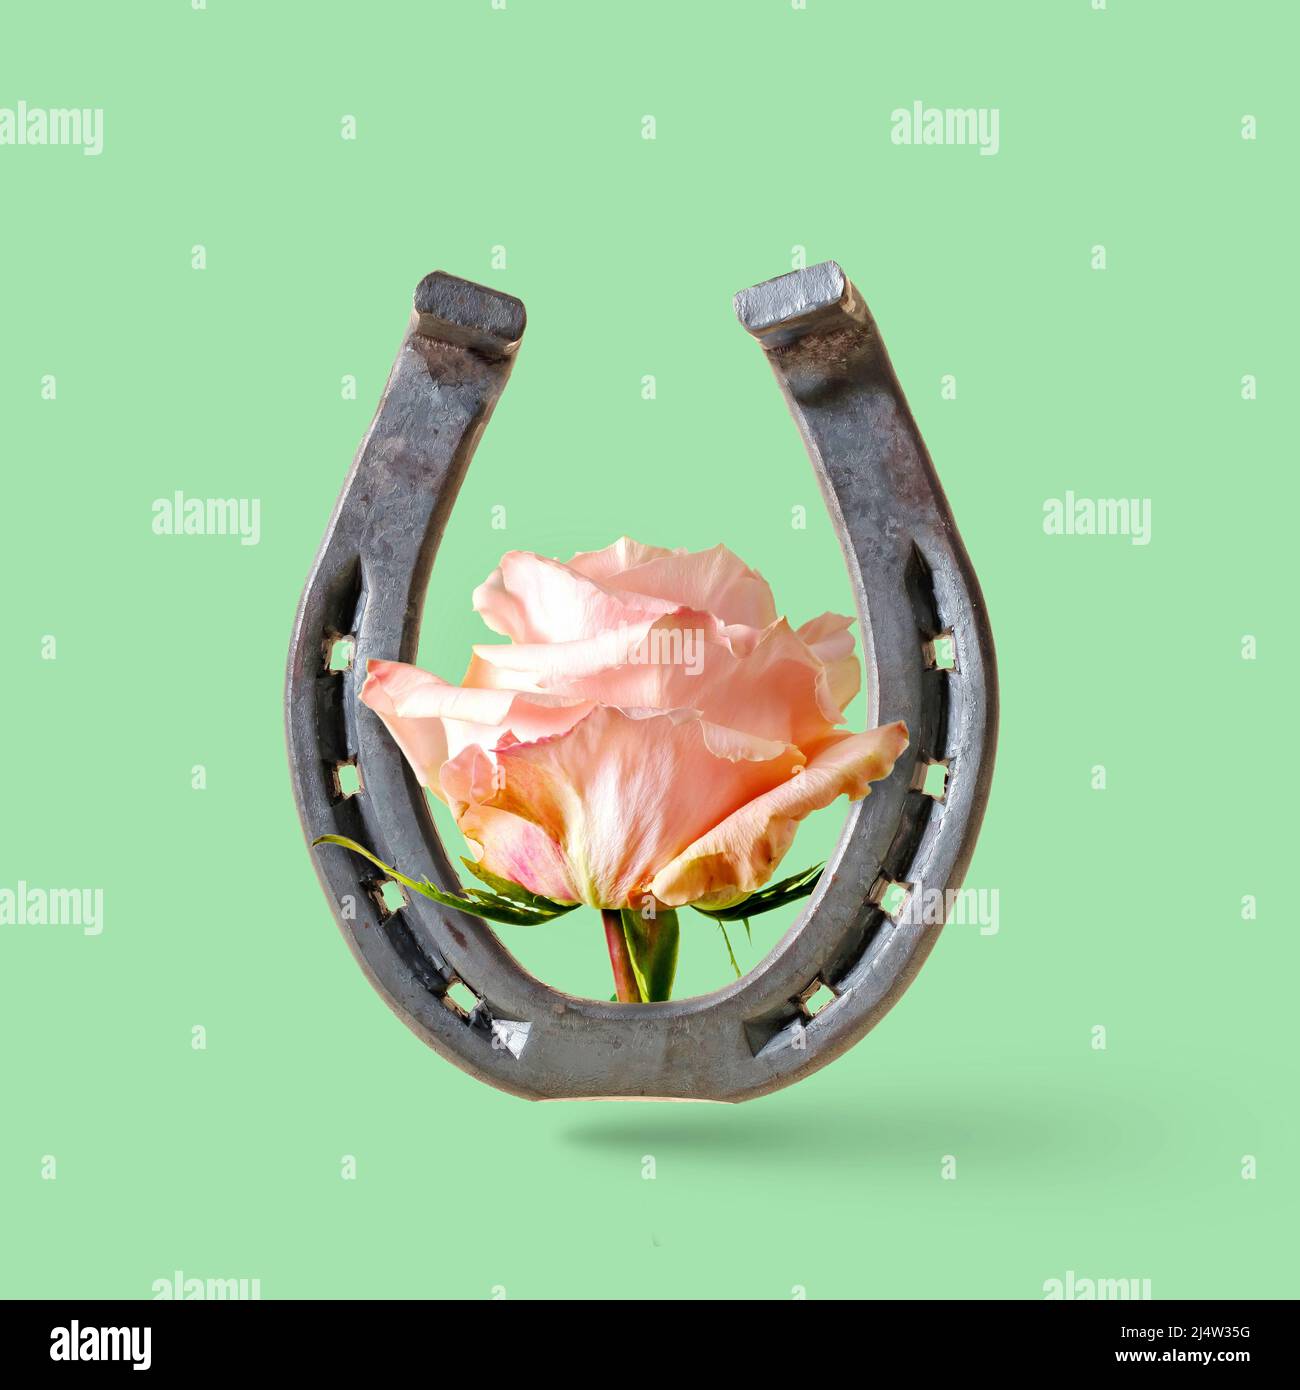 Rose flower and horseshoe on a green background. Minimal concept of wild west and rural usa rodeo or good luck. Stock Photo